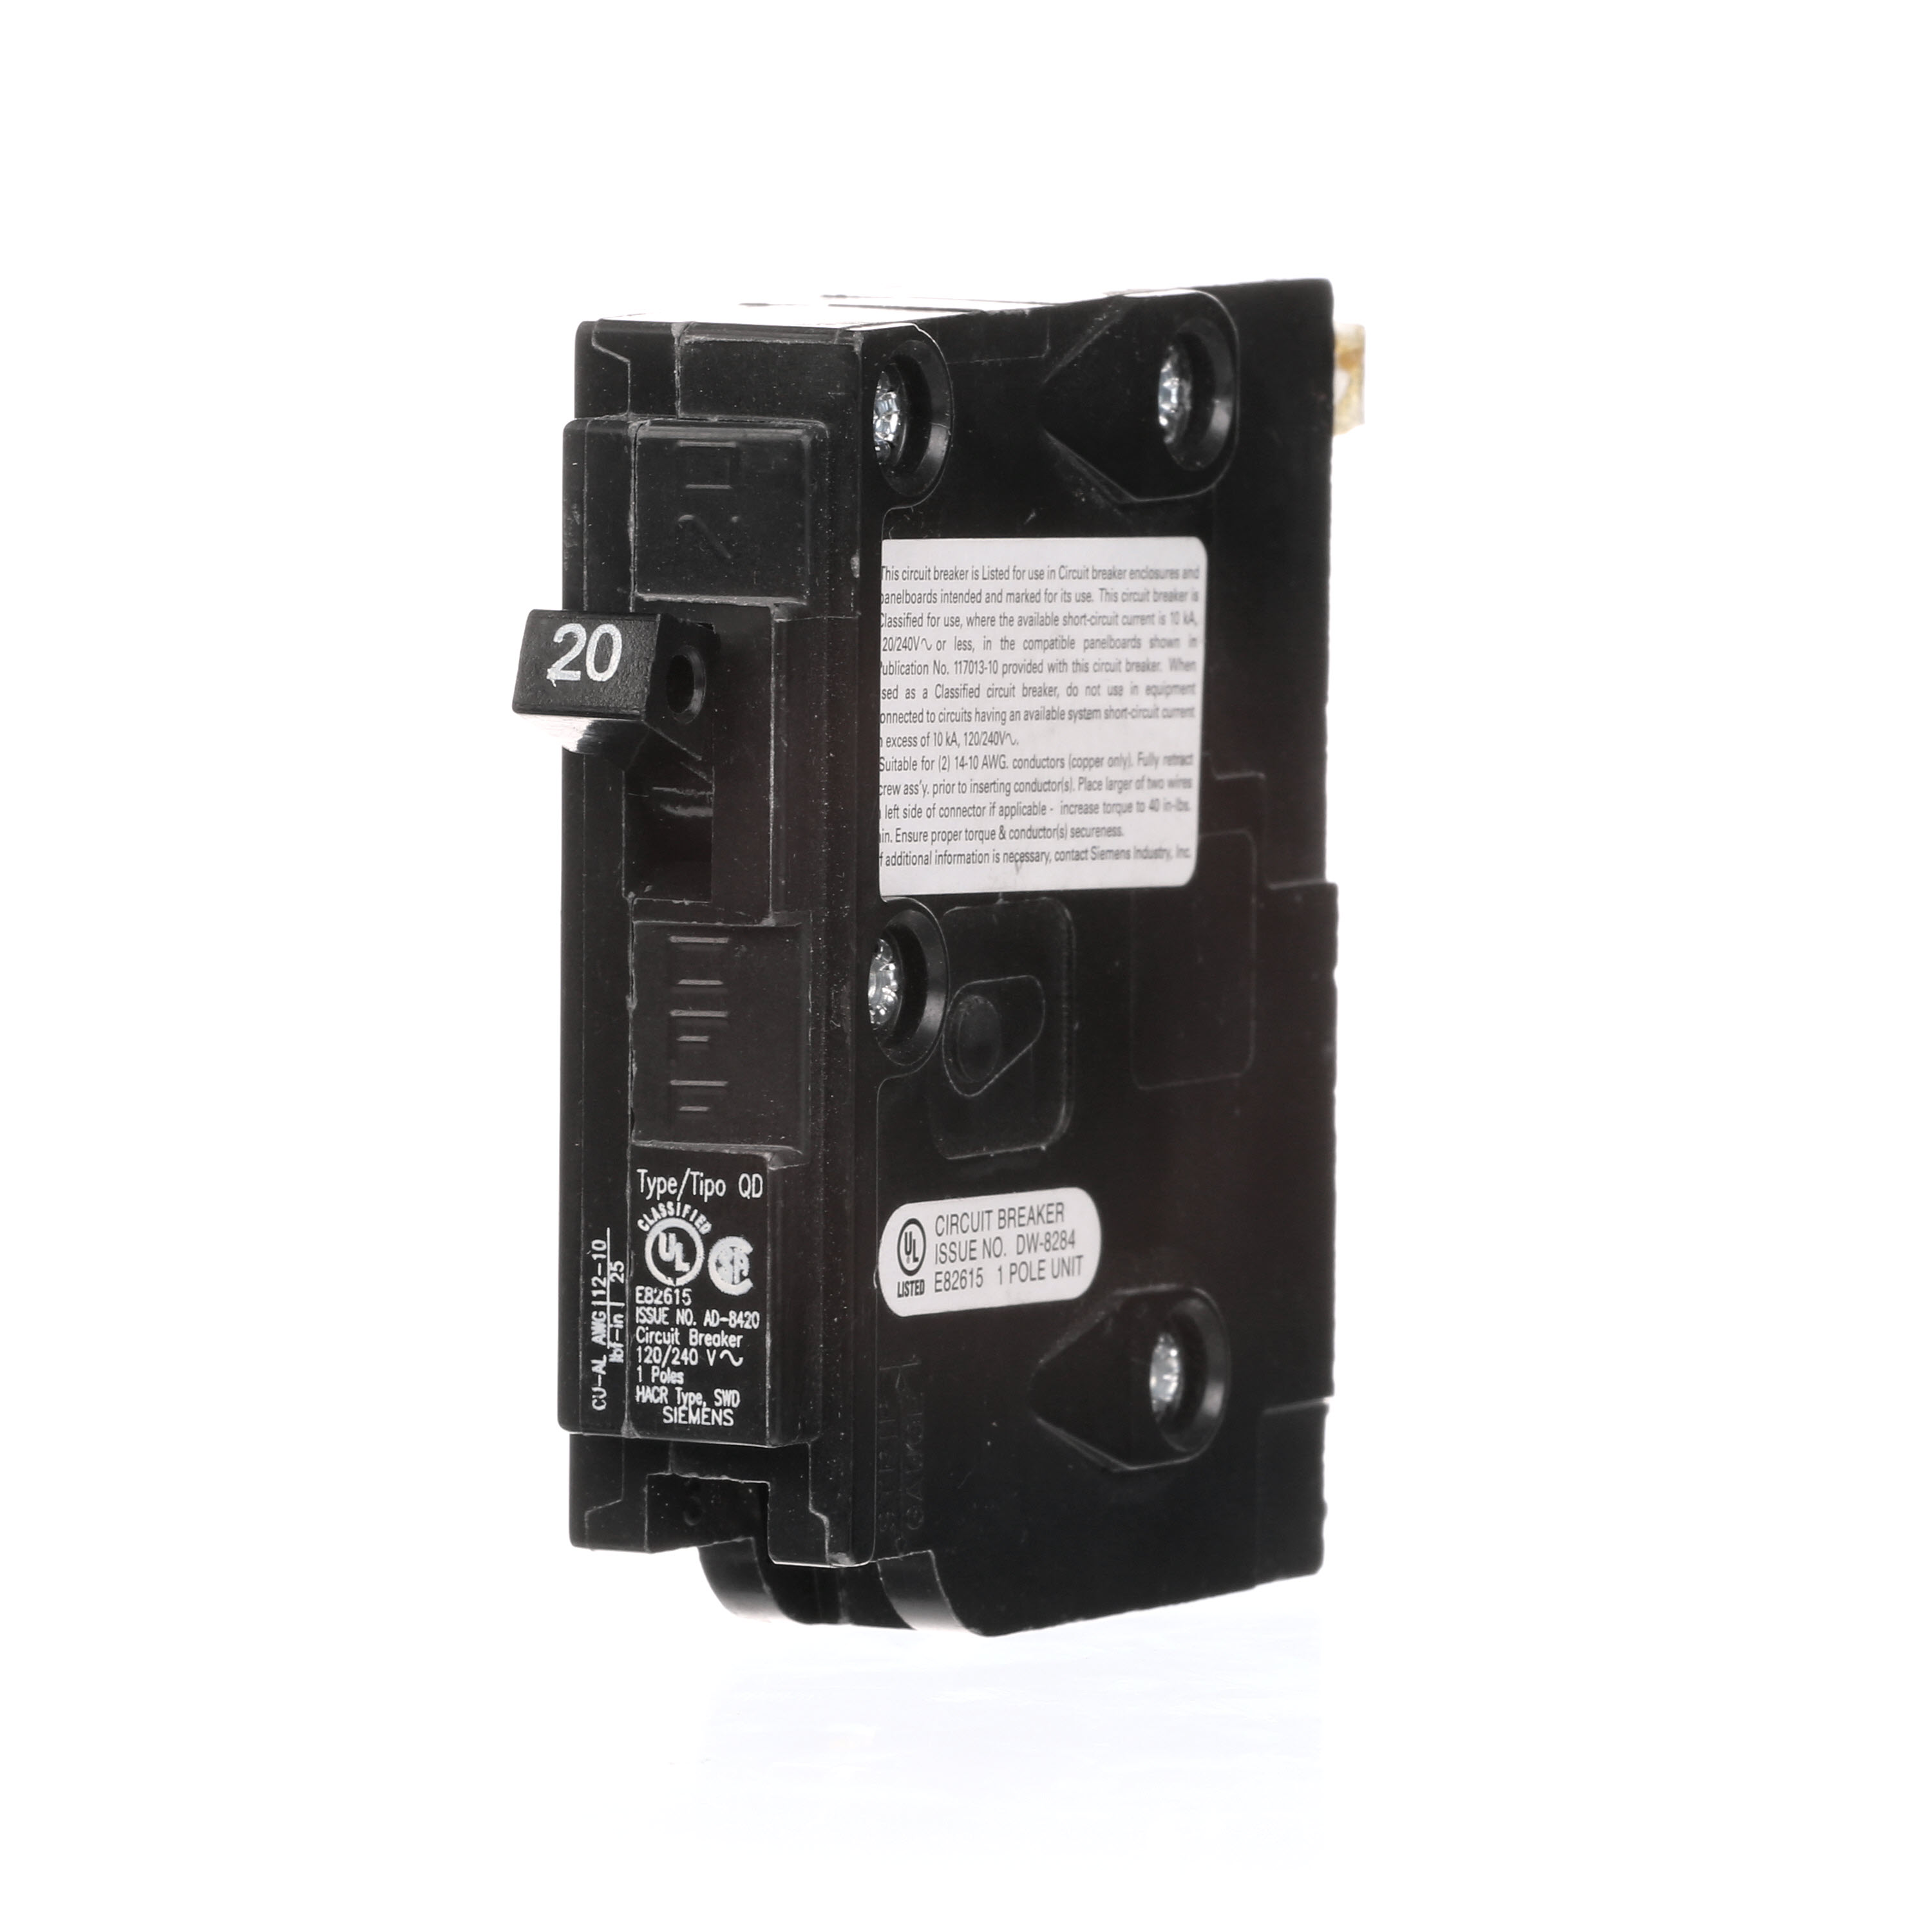 Siemens Low Voltage Residential Circuit Breakers. QD 3/4 IN Plug-In 1-Pole circuit breaker. Rated 120V (20A) AIR (10 kA). Special features HACR rated, UL listed and classified.